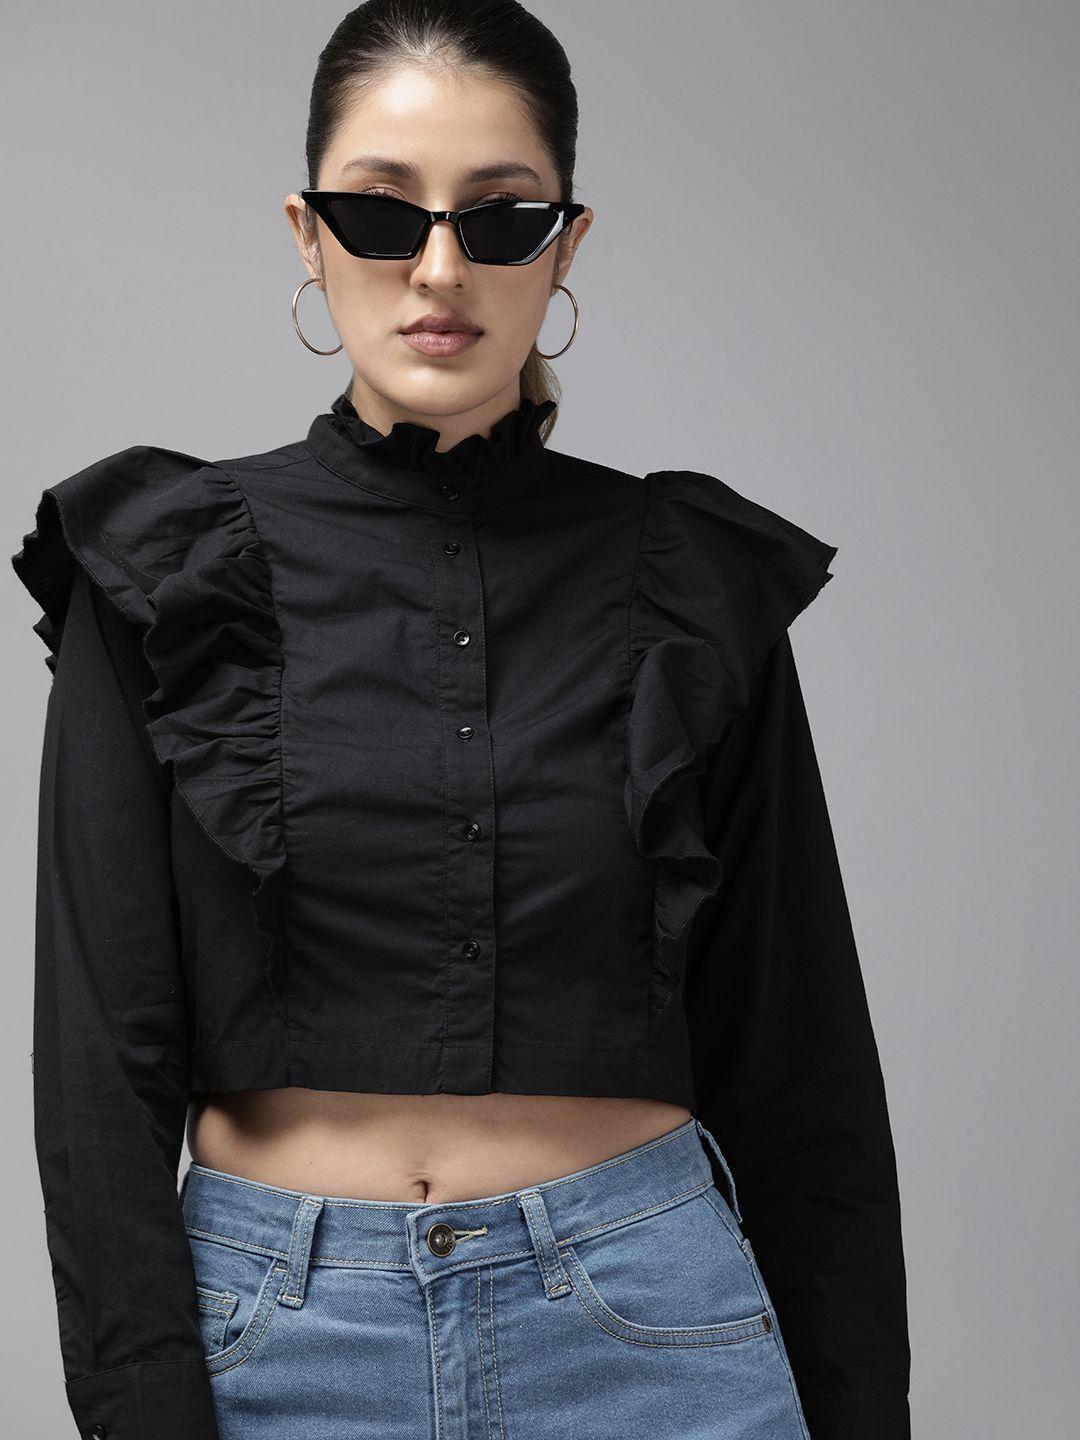 the-roadster-life-co.-slim-fit-ruffles-pure-cotton-casual-crop-shirt